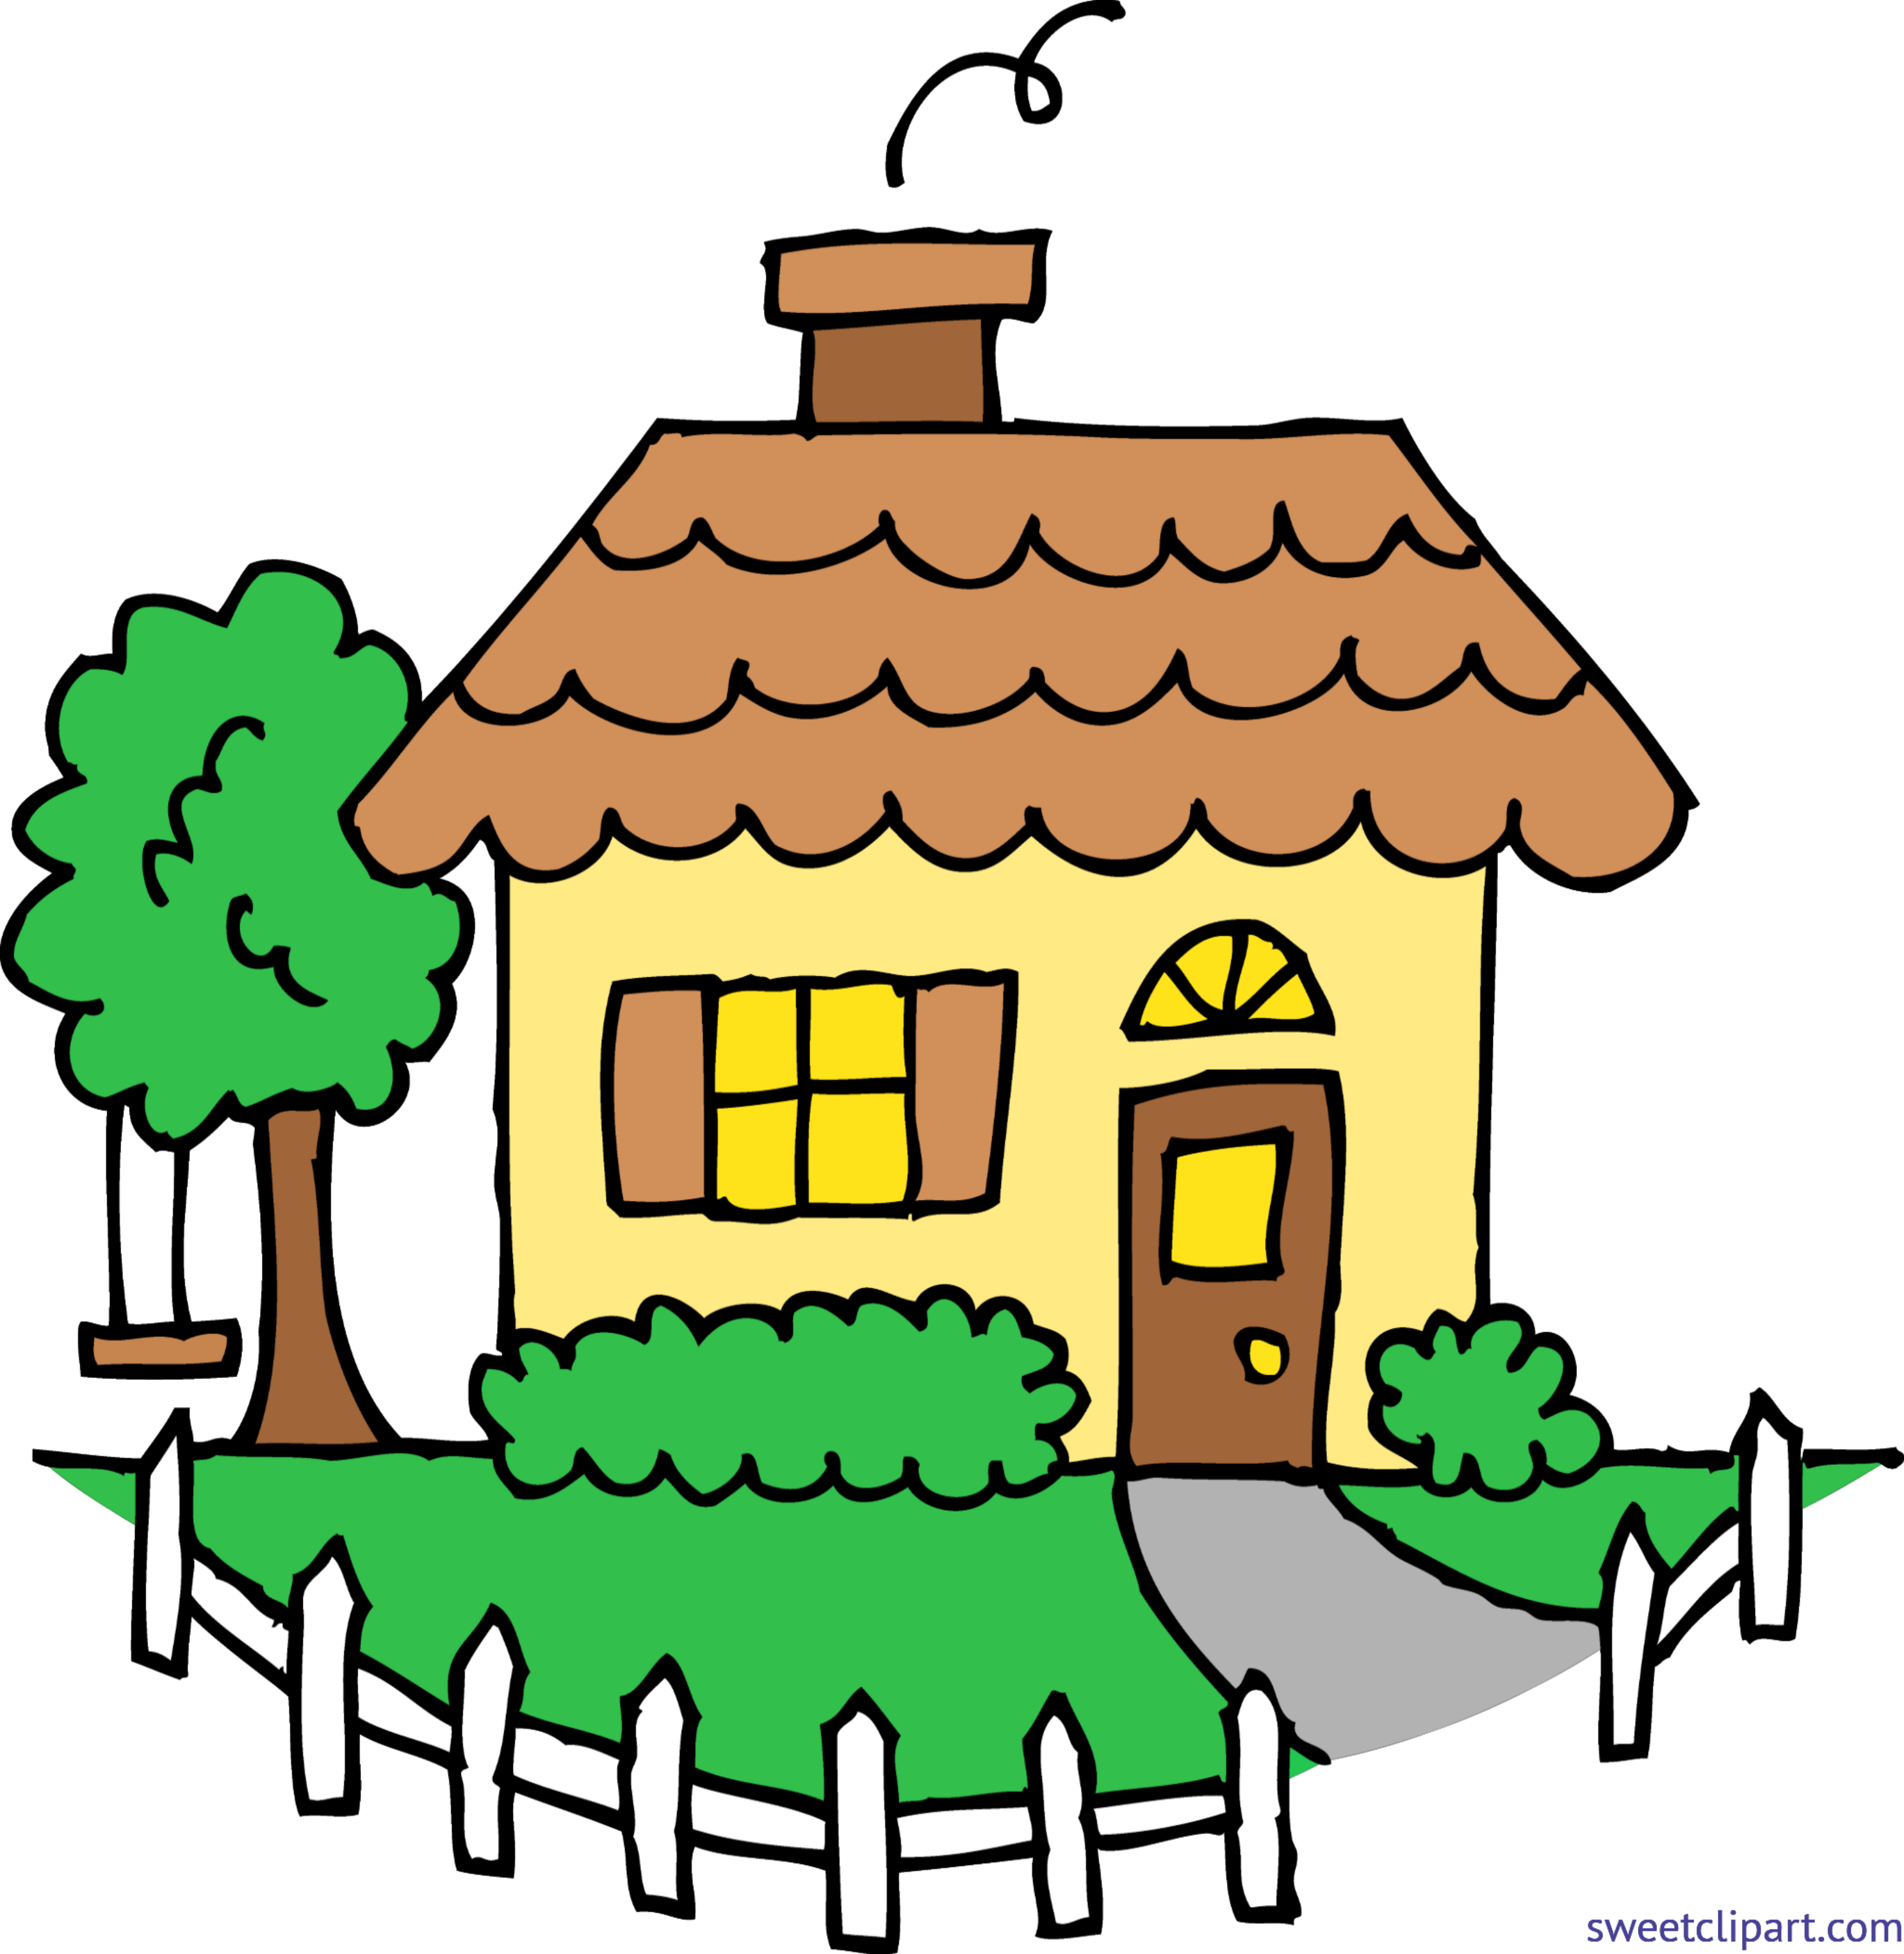 Home Clipart at GetDrawings.com.